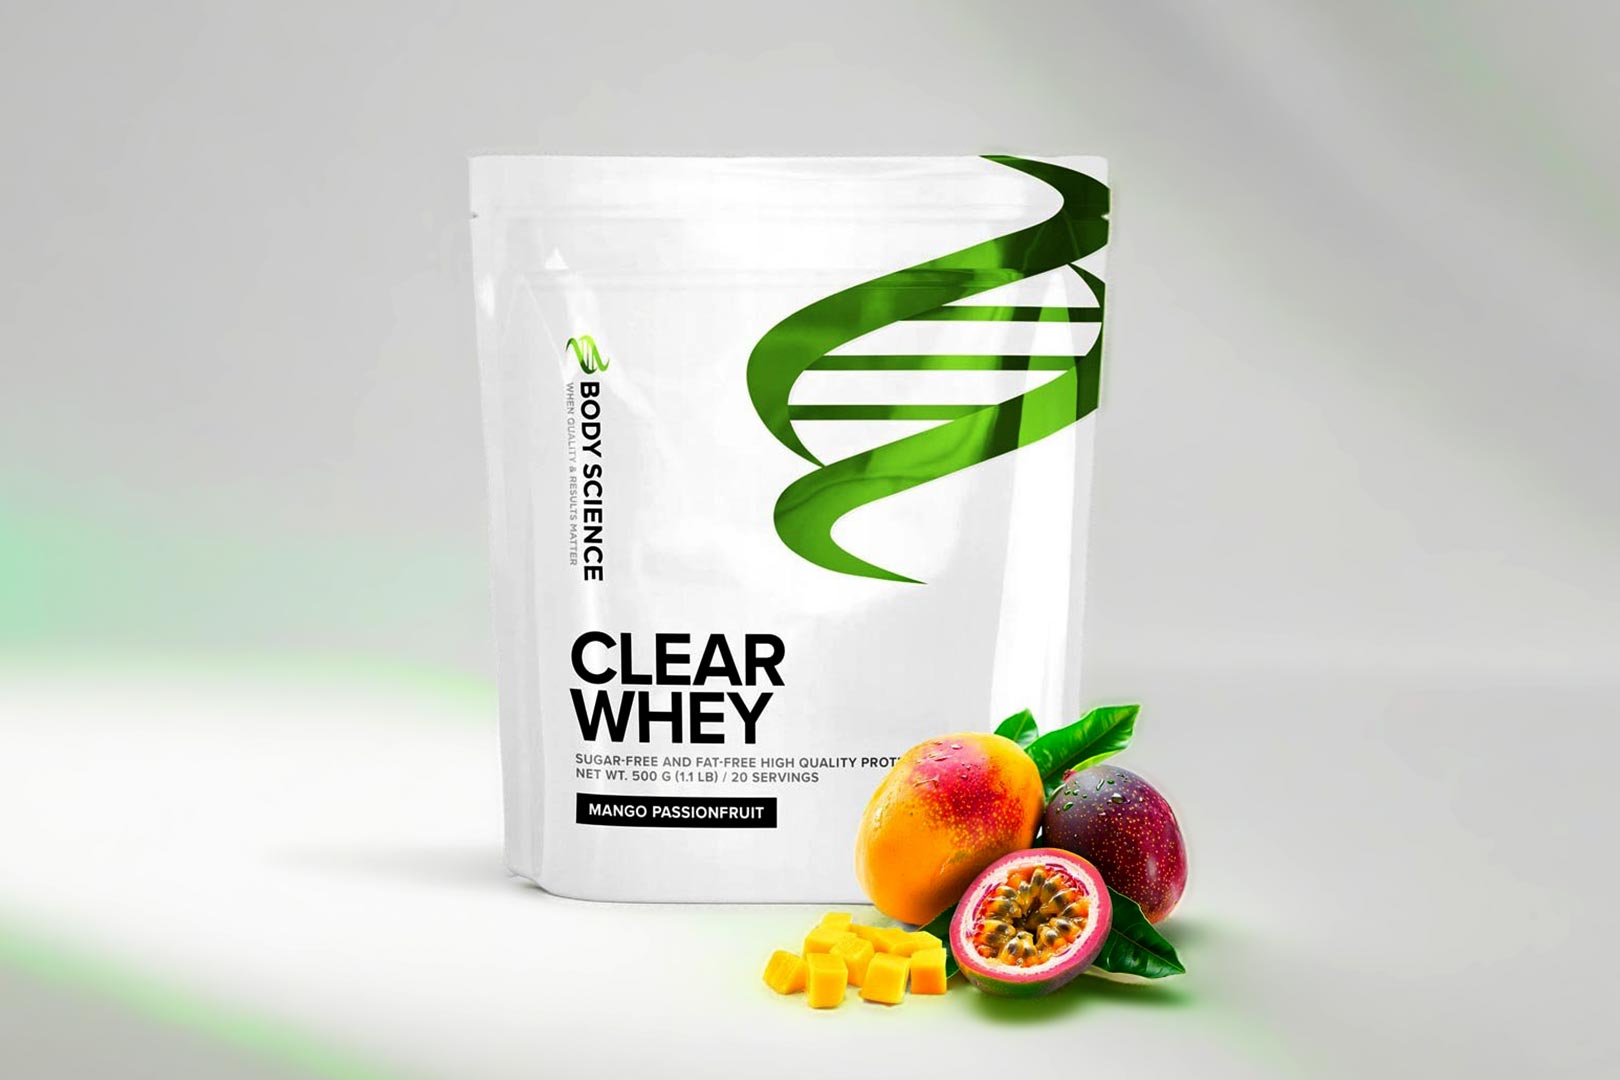 Body Science Mango Passionfruit Clear Whey